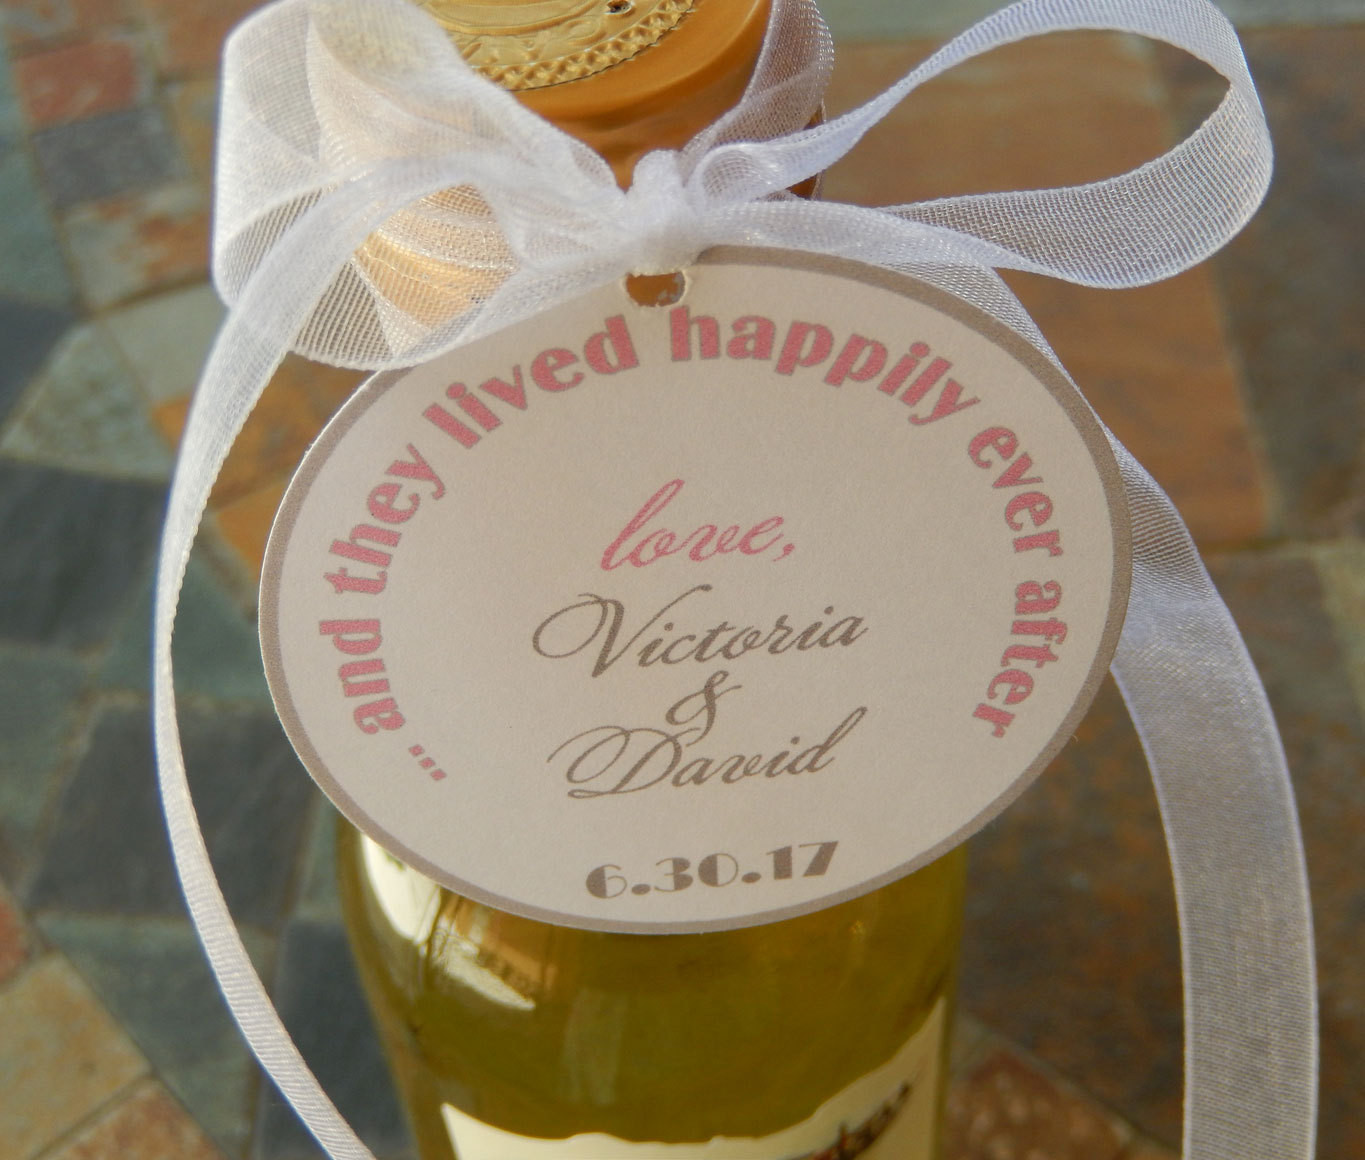 Disney Wedding Favors
 Disney Inspired 2 Wedding Favor Tags and they Lived